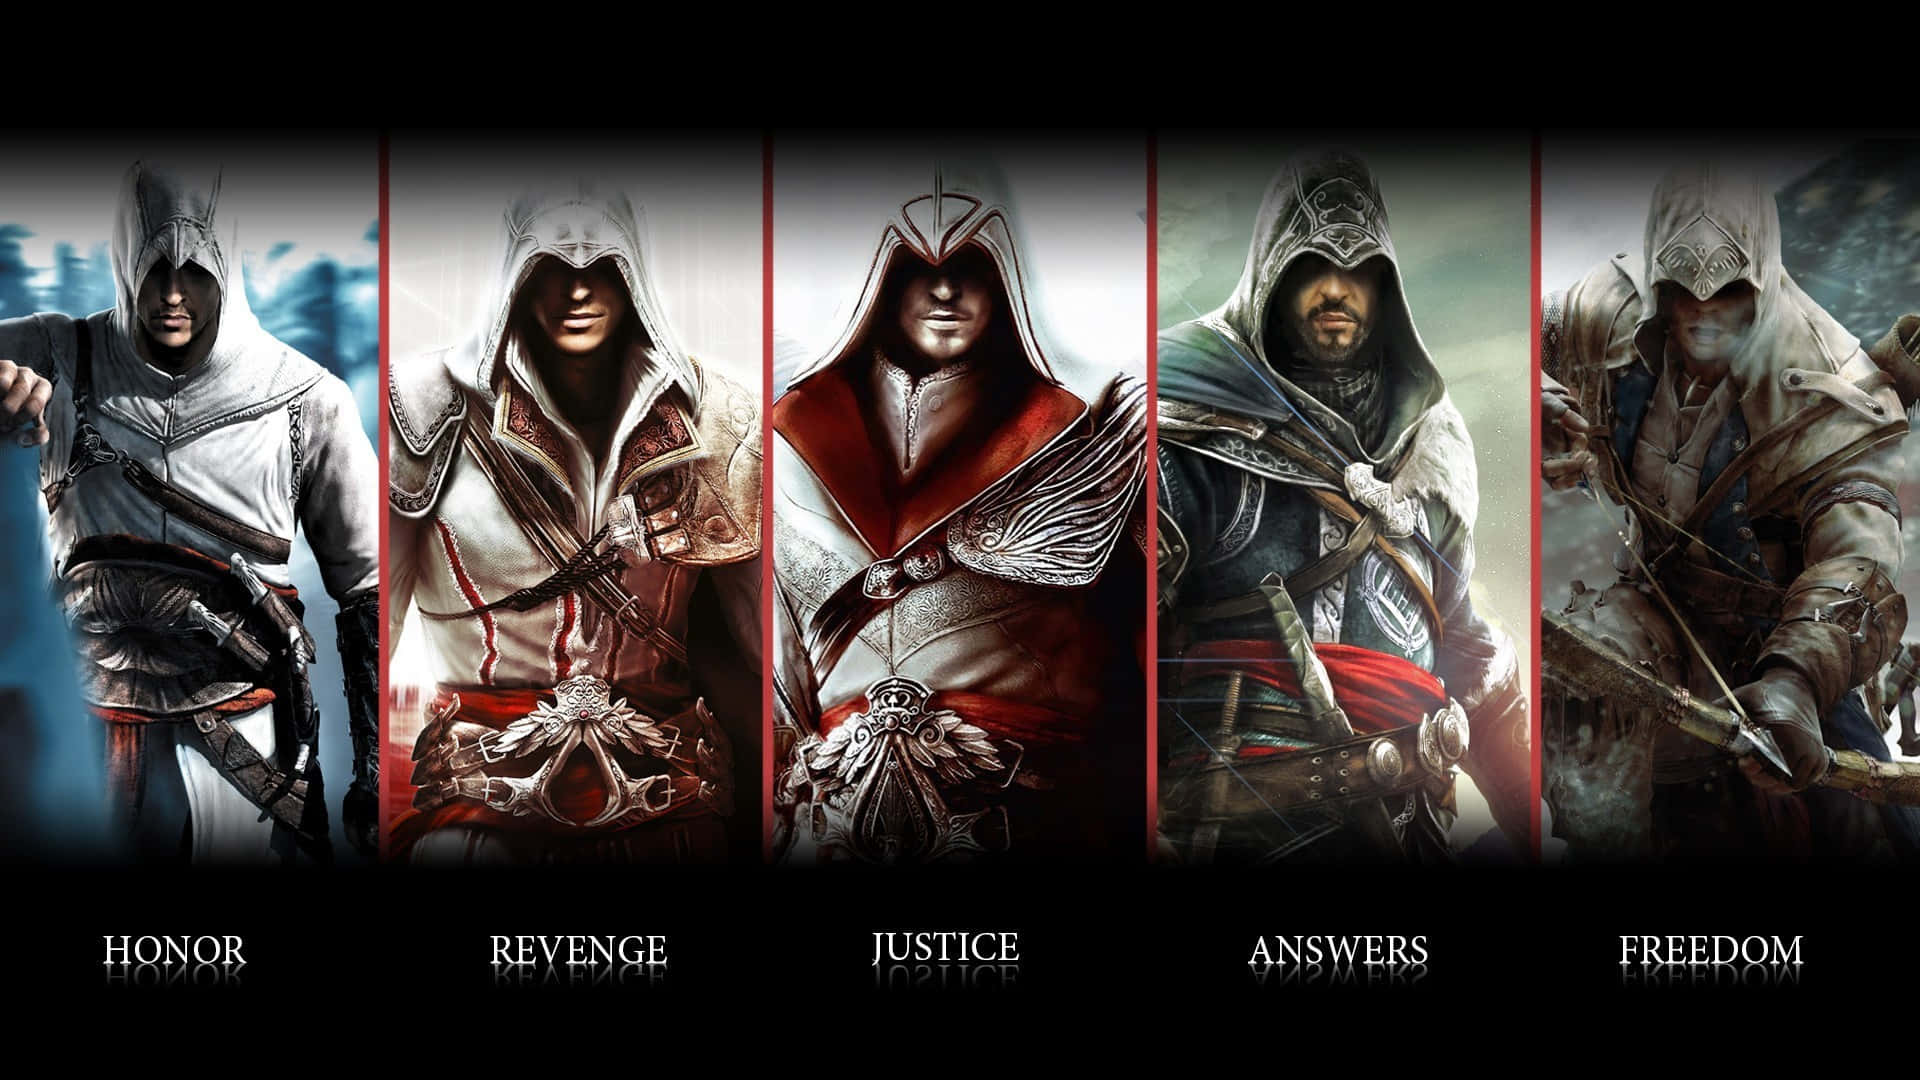 The epic gathering of Assassin's Creed iconic heroes Wallpaper